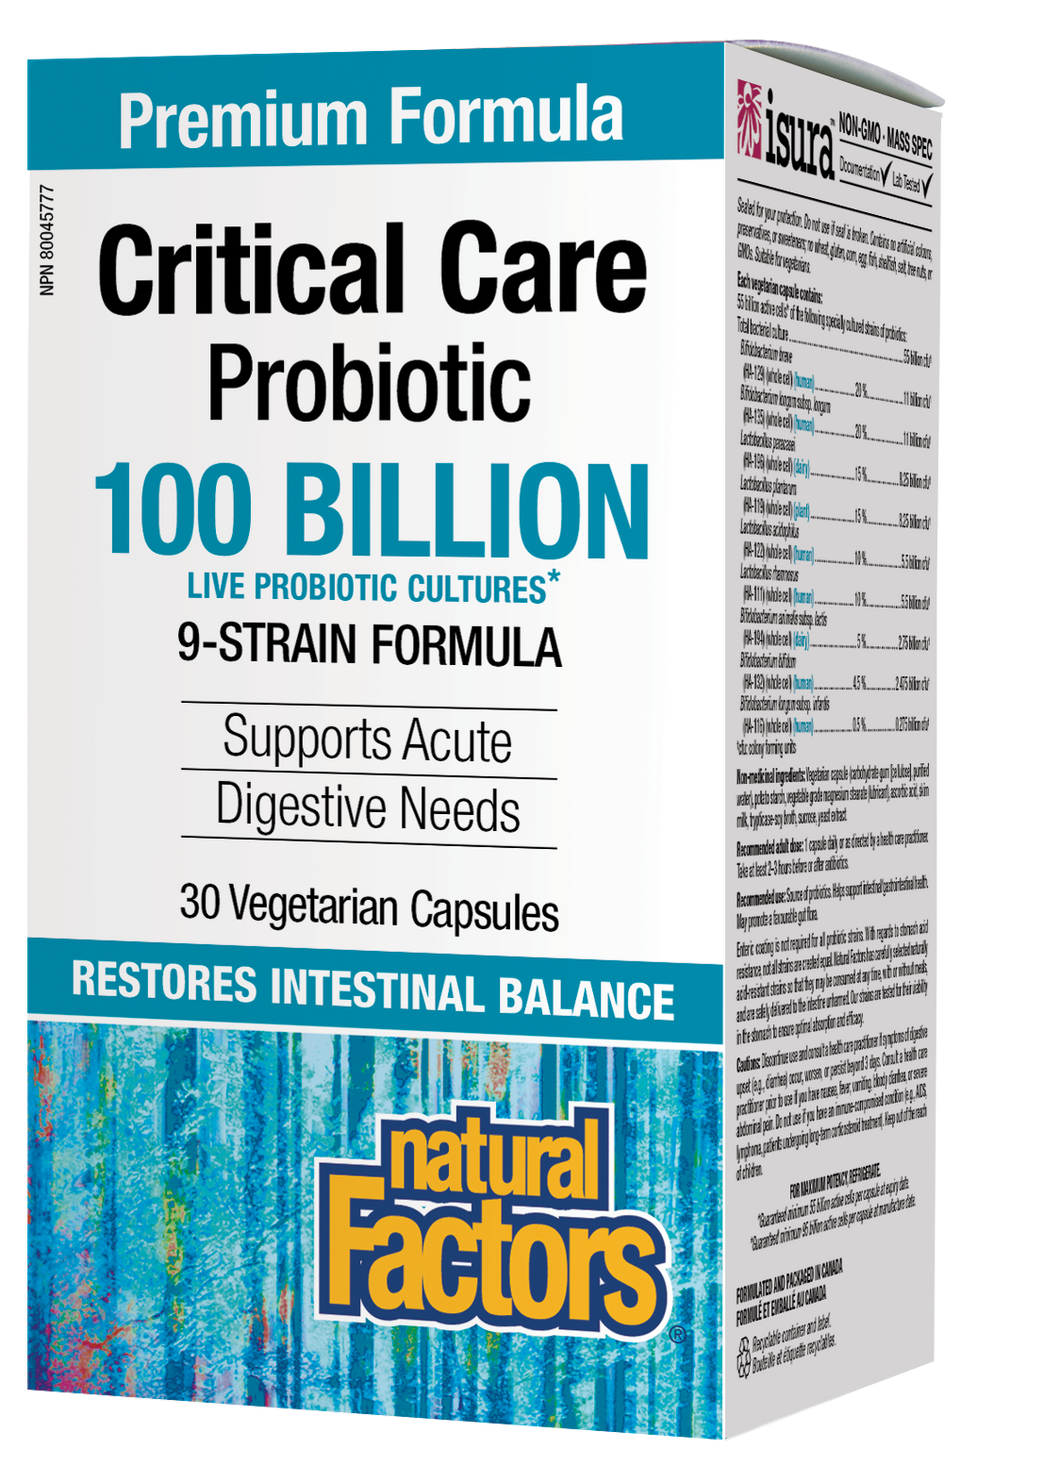 Natural Factors Critical Care Probiotic 100 Billion Active Cells contains nine Bifidobacteria and Lactobacilli species for acute targeted support of both the small and large intestines. It restores beneficial bacteria lost through antibiotic use and enhances immune health.